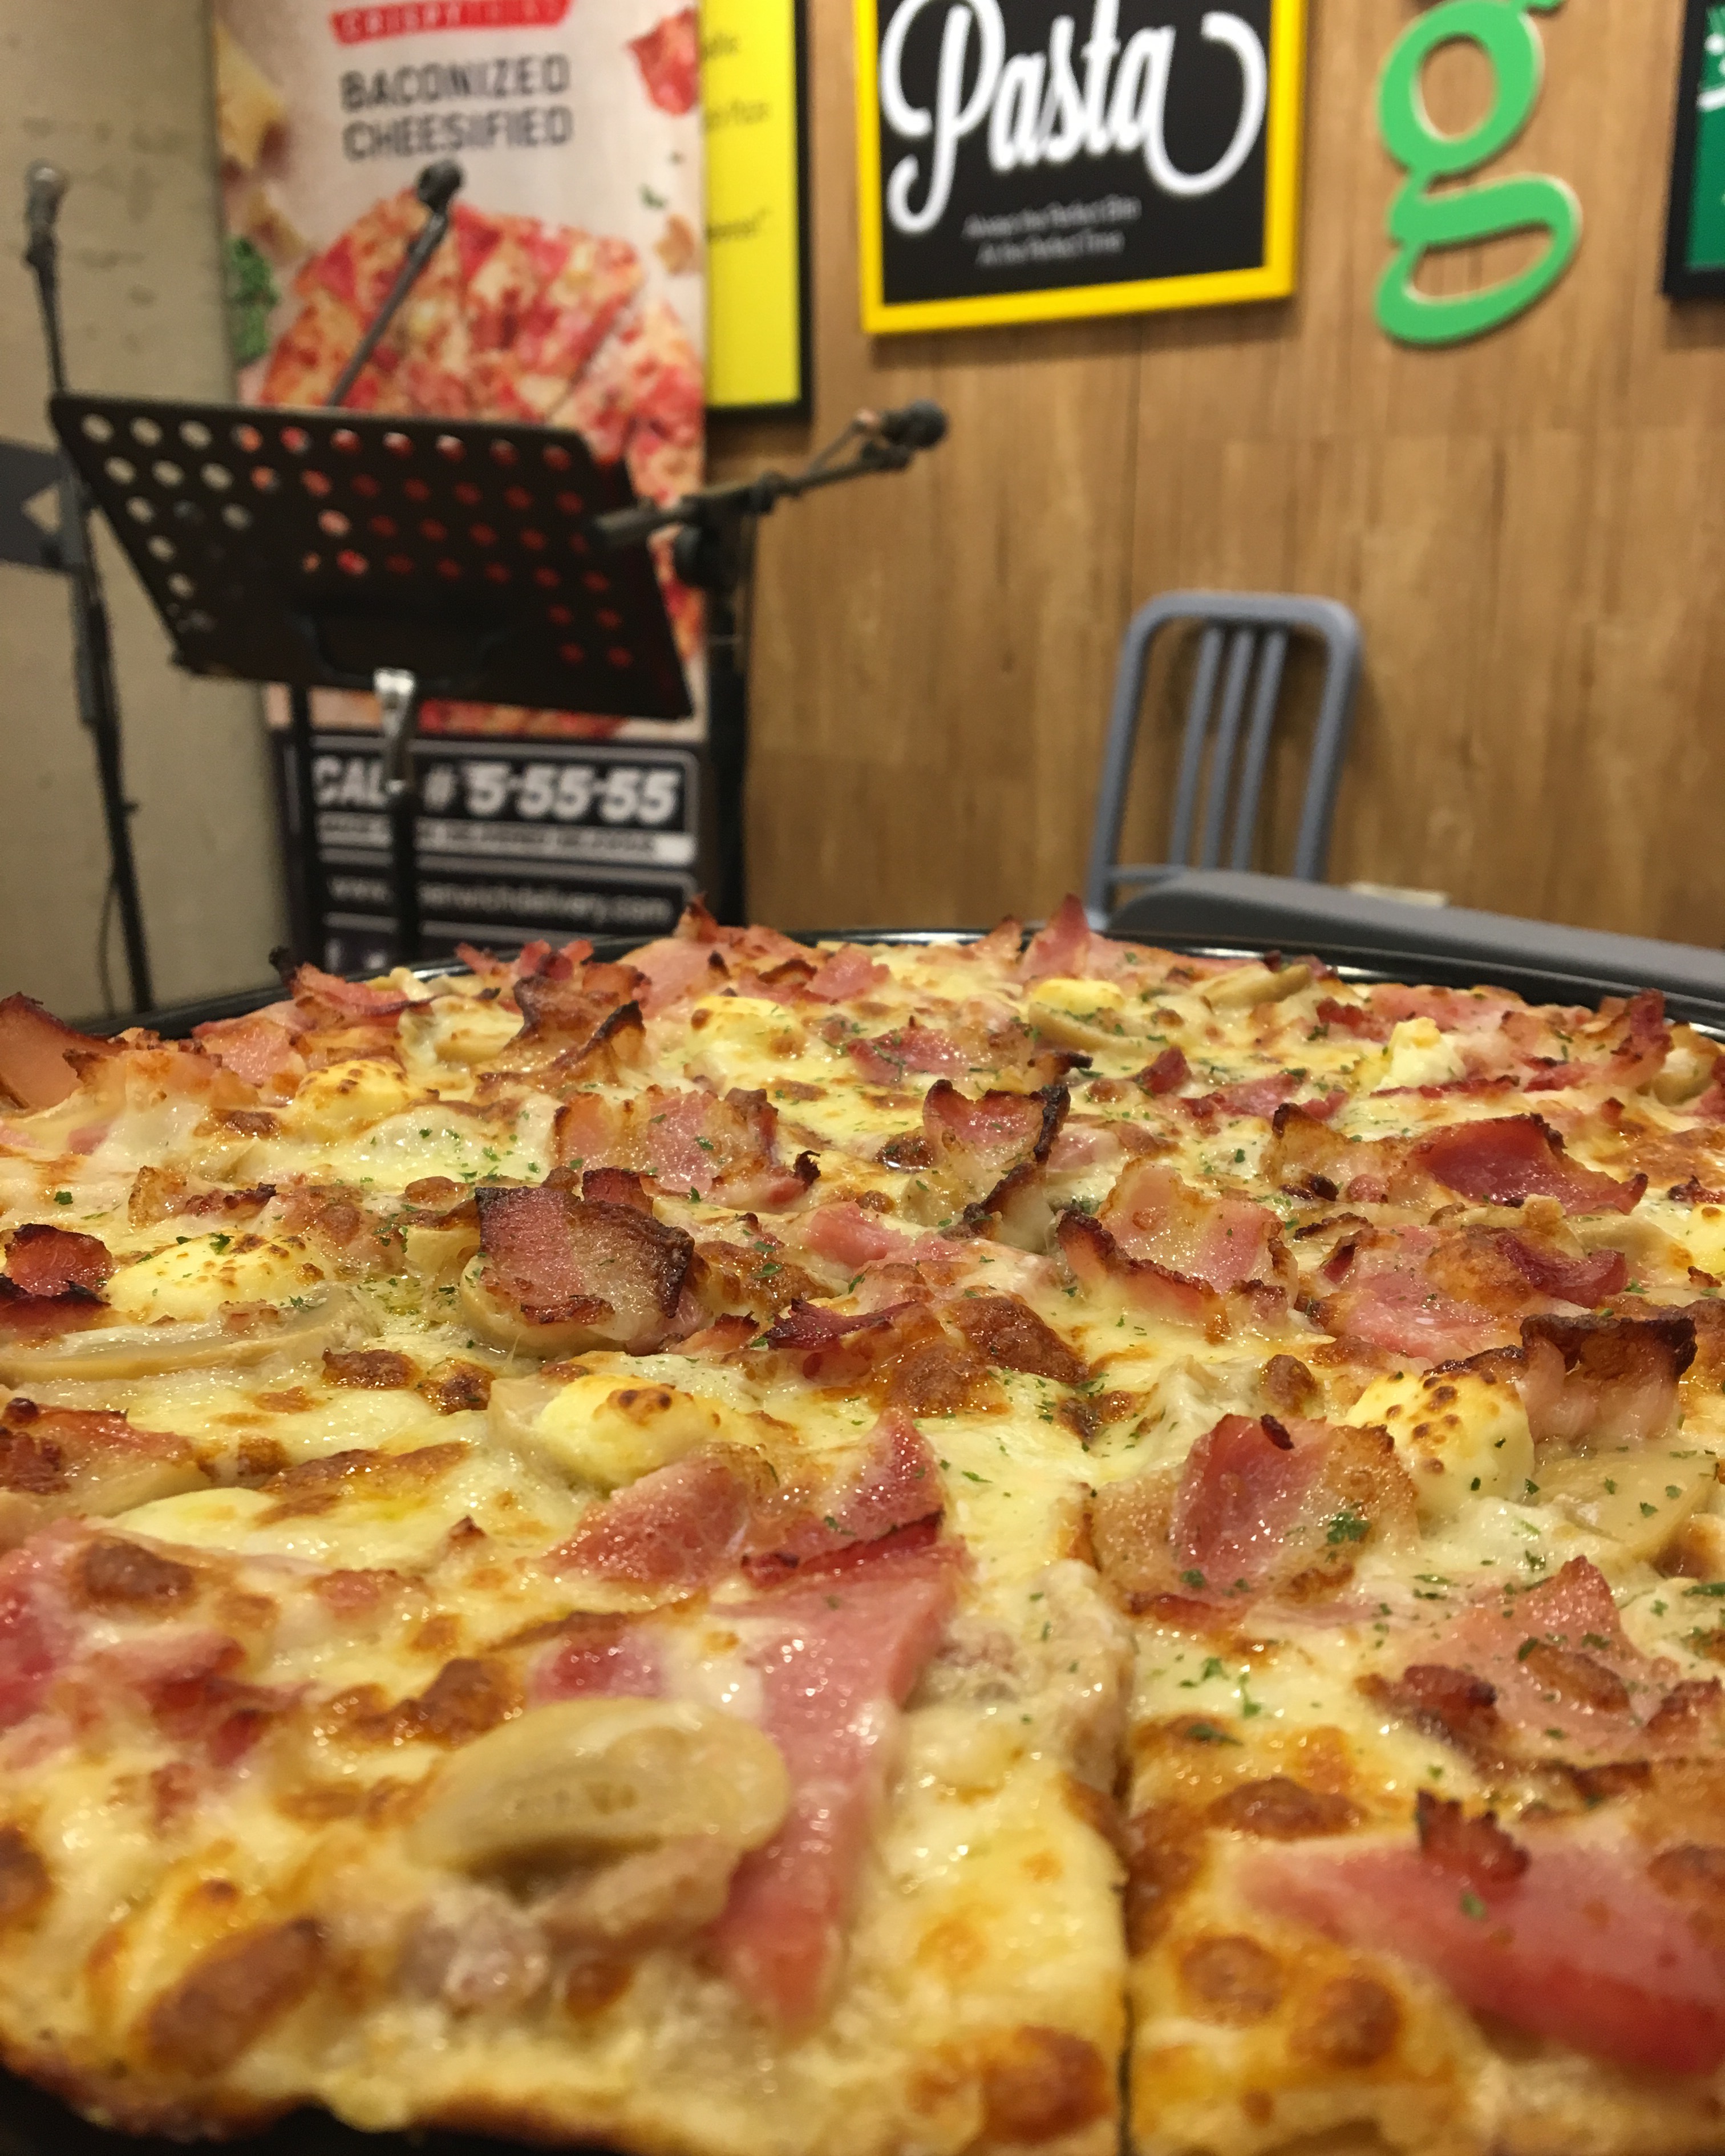 Greenwich Pizza SM CDO sports new look, launches Bacon Crispy Thins